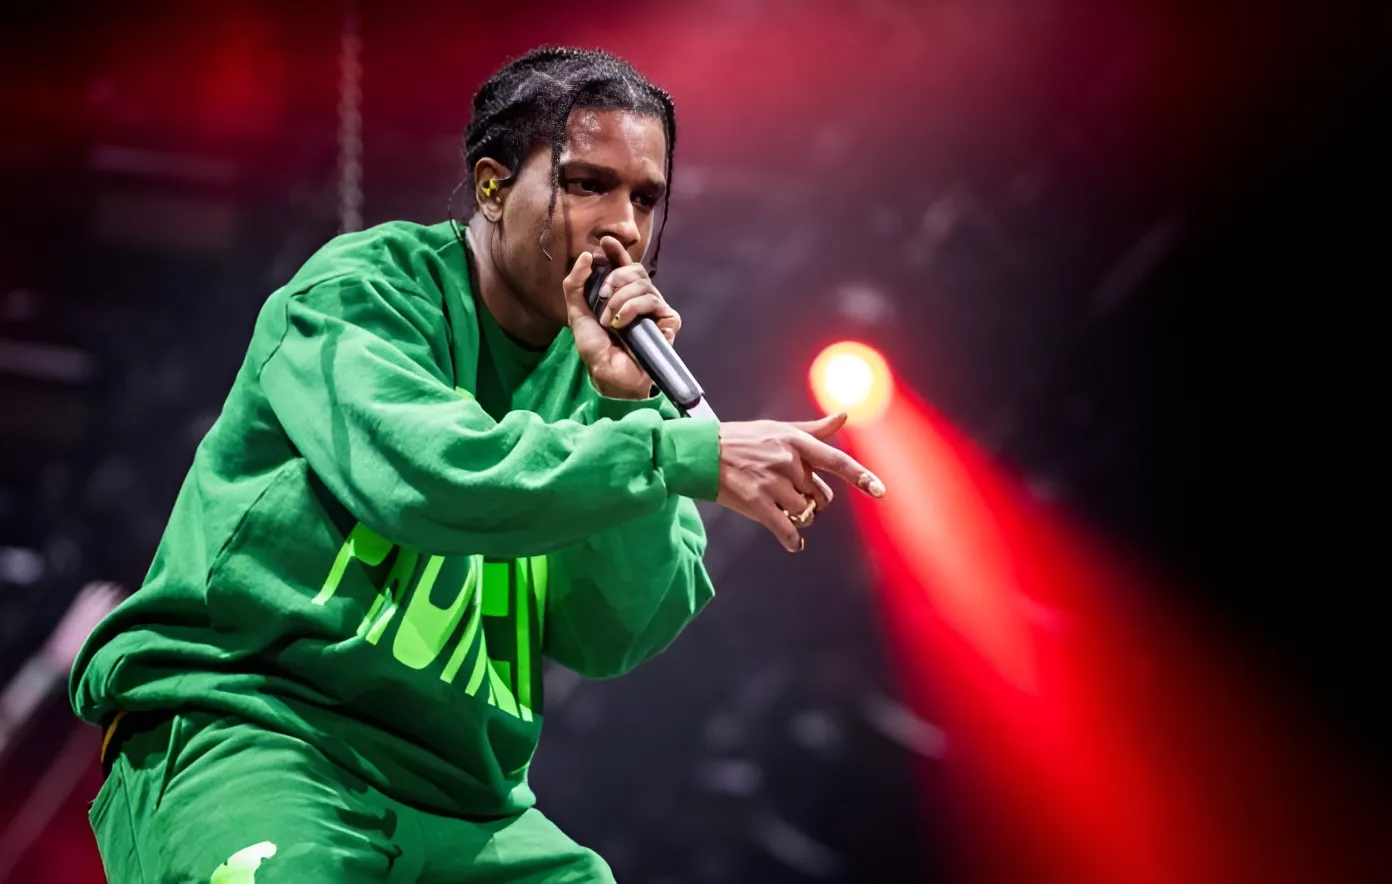 A$AP Rocky speaks on his upcoming album and the Top 3 things he created [Video]